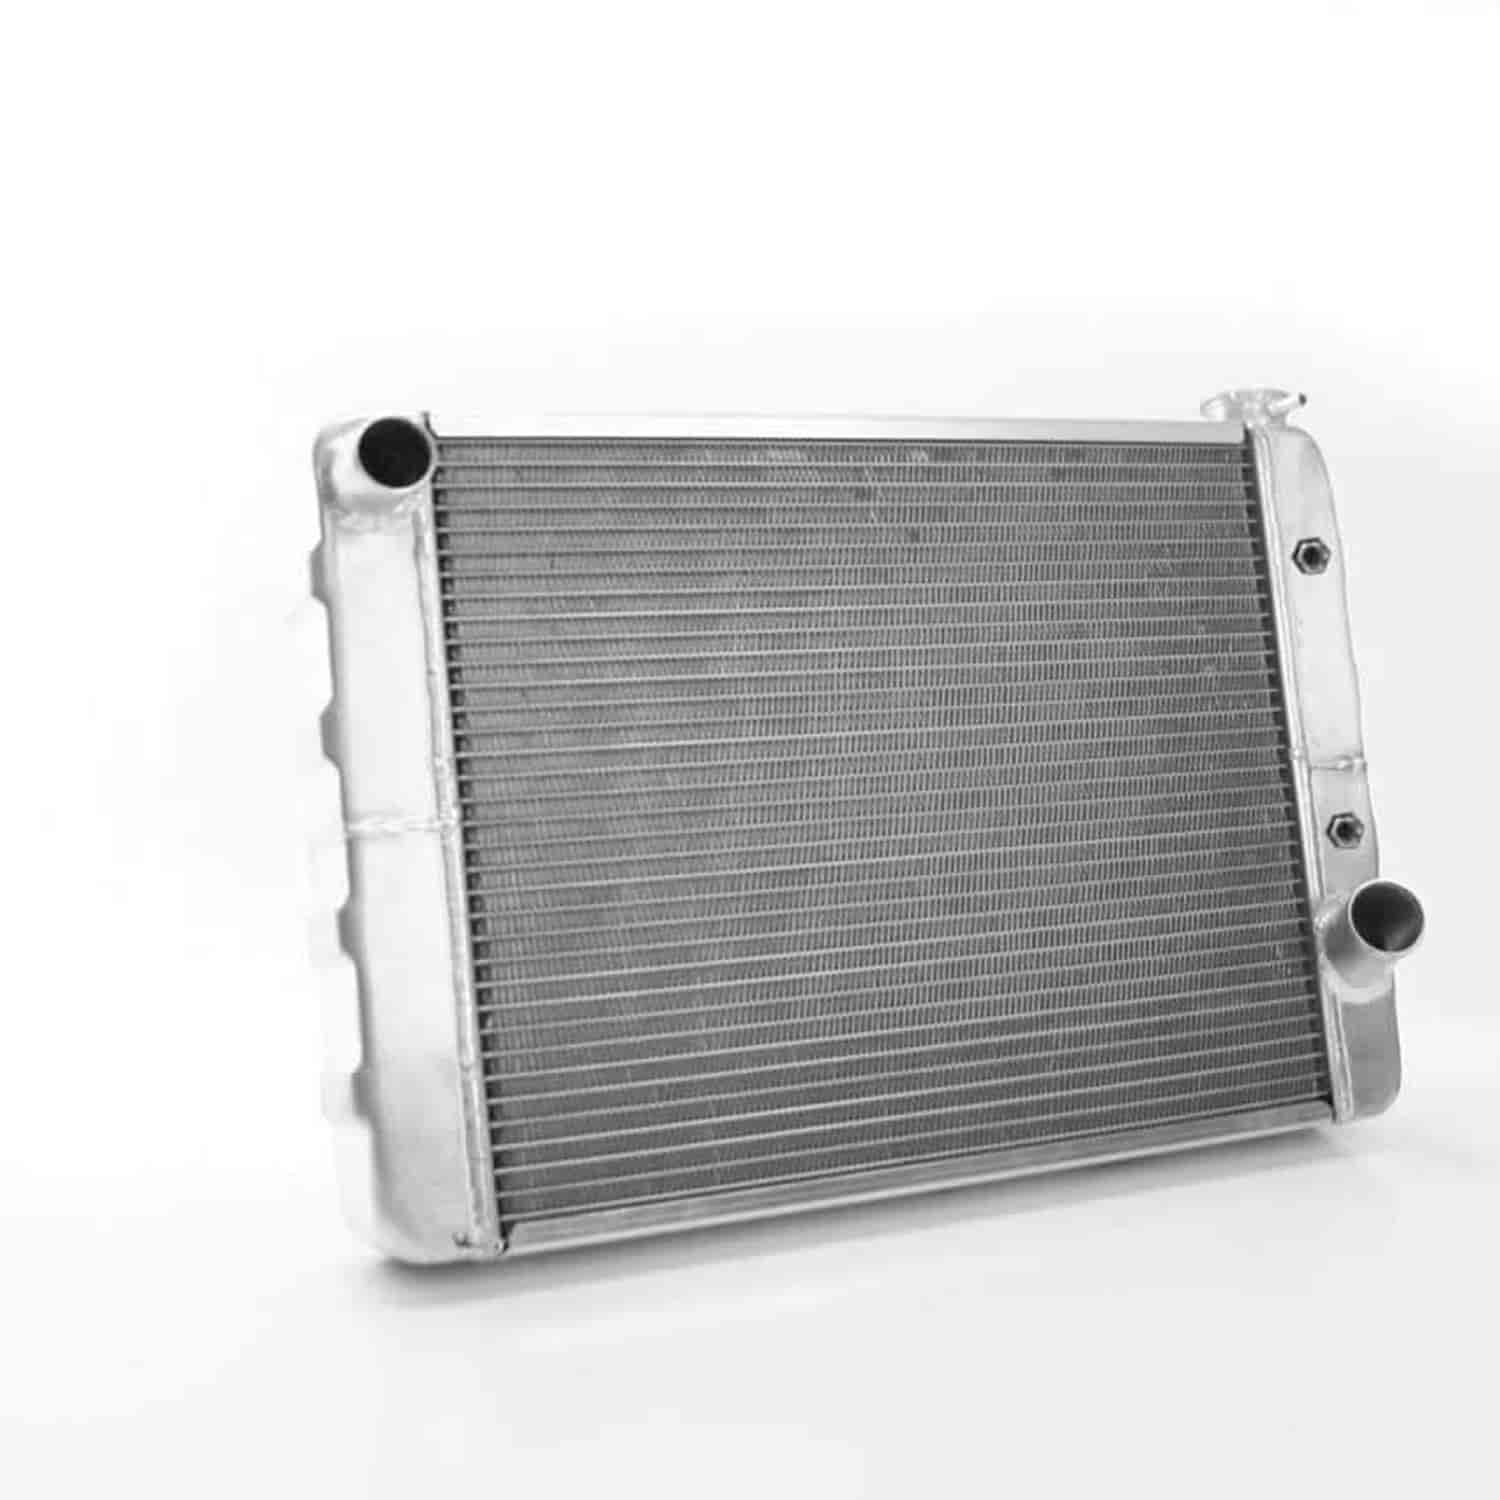 ClassicCool Universal Fit Radiator Single Pass Crossflow Design 24" x 15.50" with Transmission Cooler